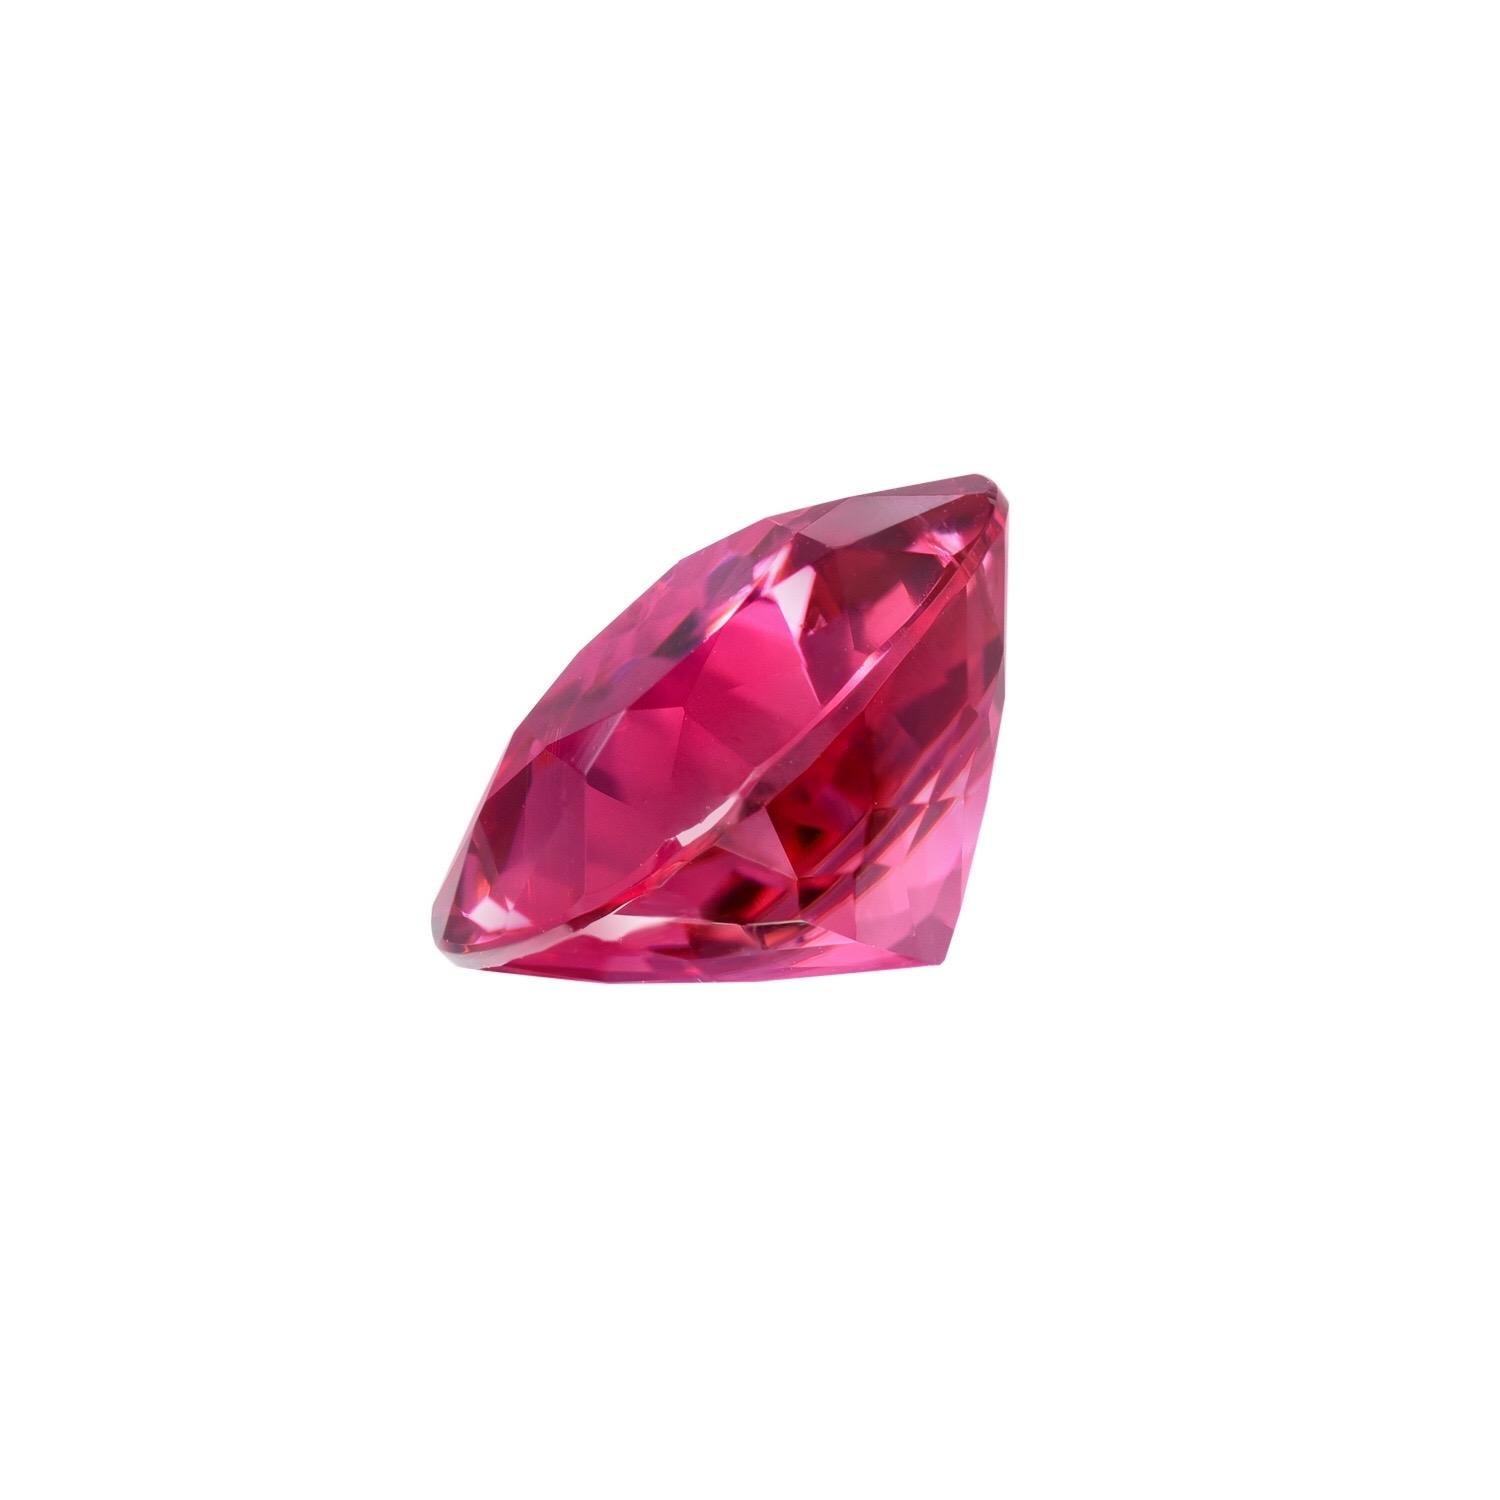 Intense Pink Tourmaline cushion cut weighing a total of 5.04 carats. This spectacular gem is offered loose and it is a great choice for a custom made jewel.
Returns are accepted and paid by us within 7 days of delivery.
We offer ultra fine custom